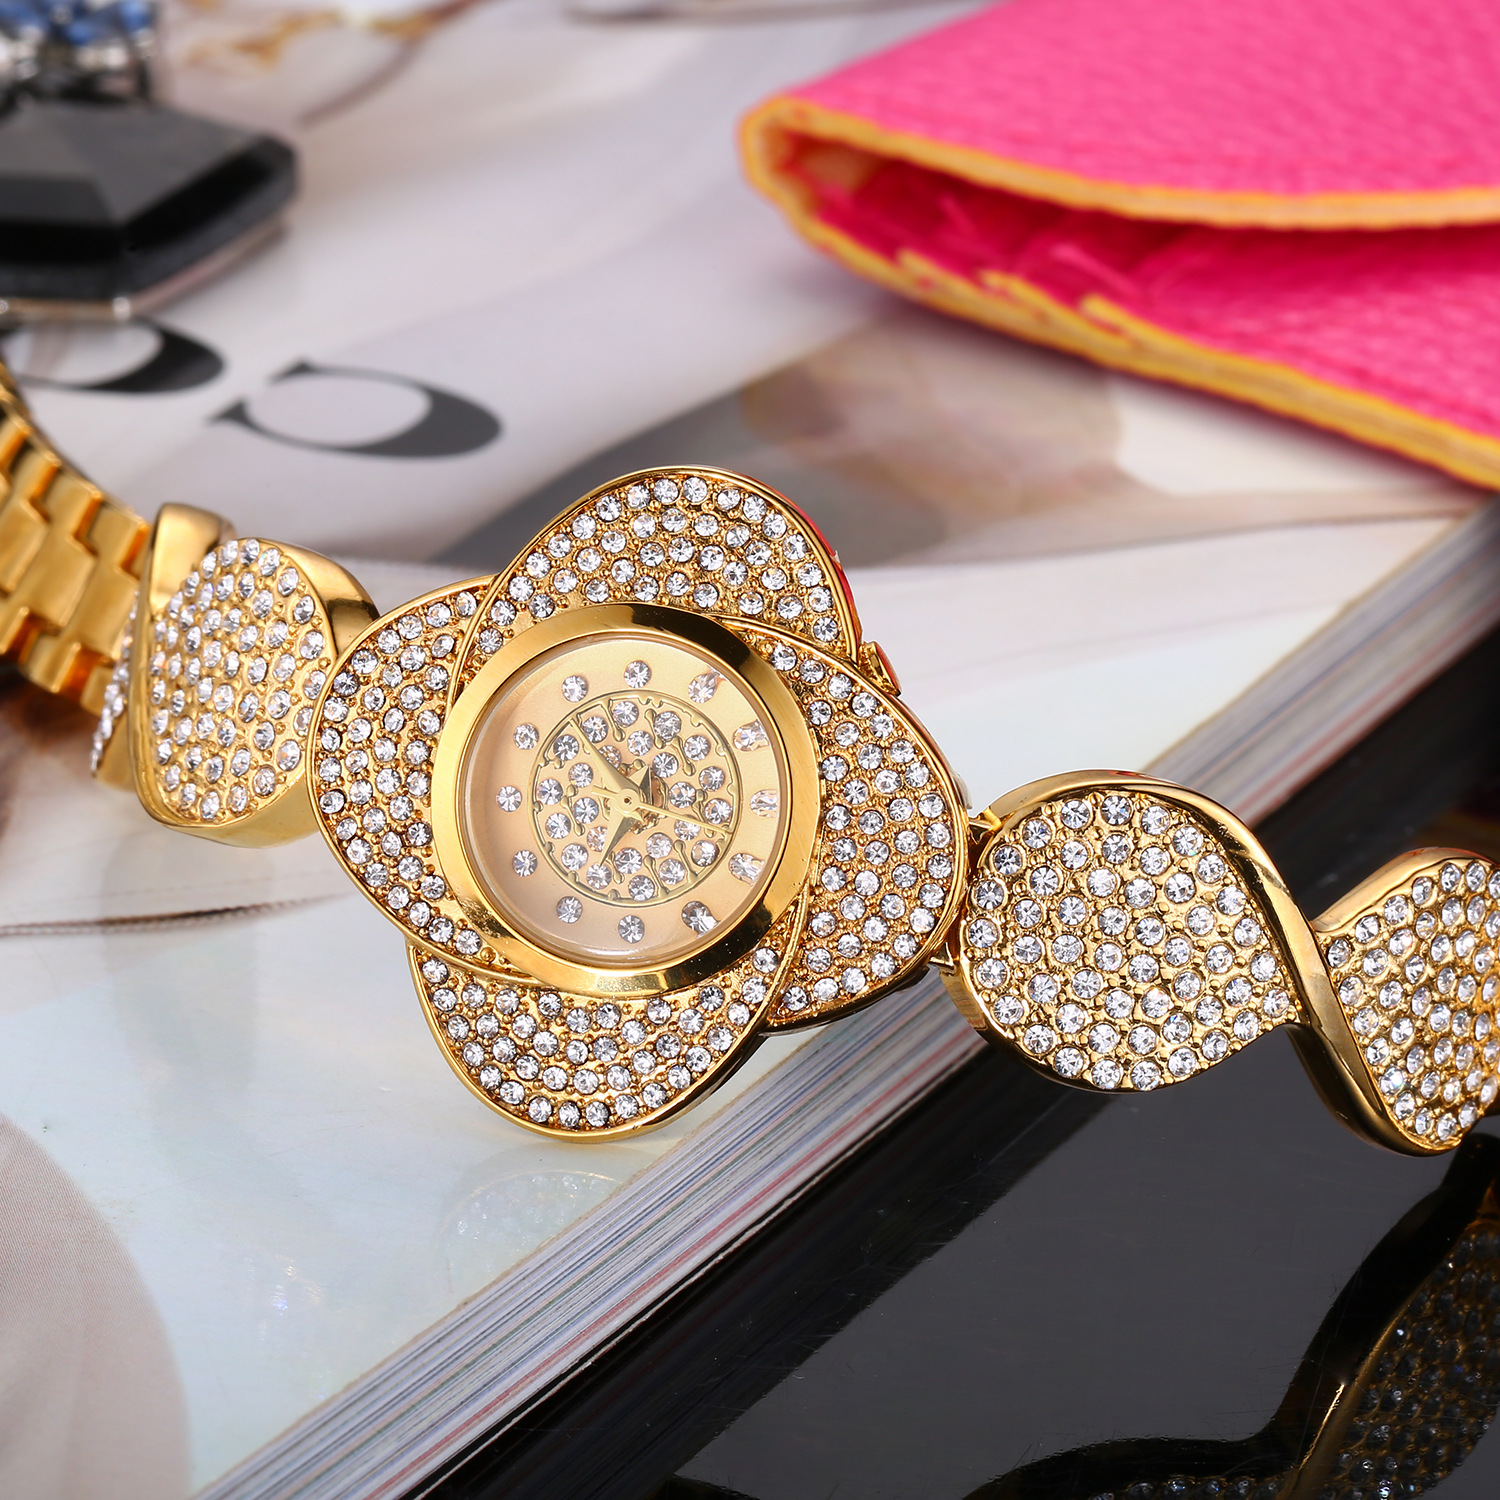 Marish new style style dial set with diamonds delicate women's quartz watch foreign trade fashion waterproof ladies watch